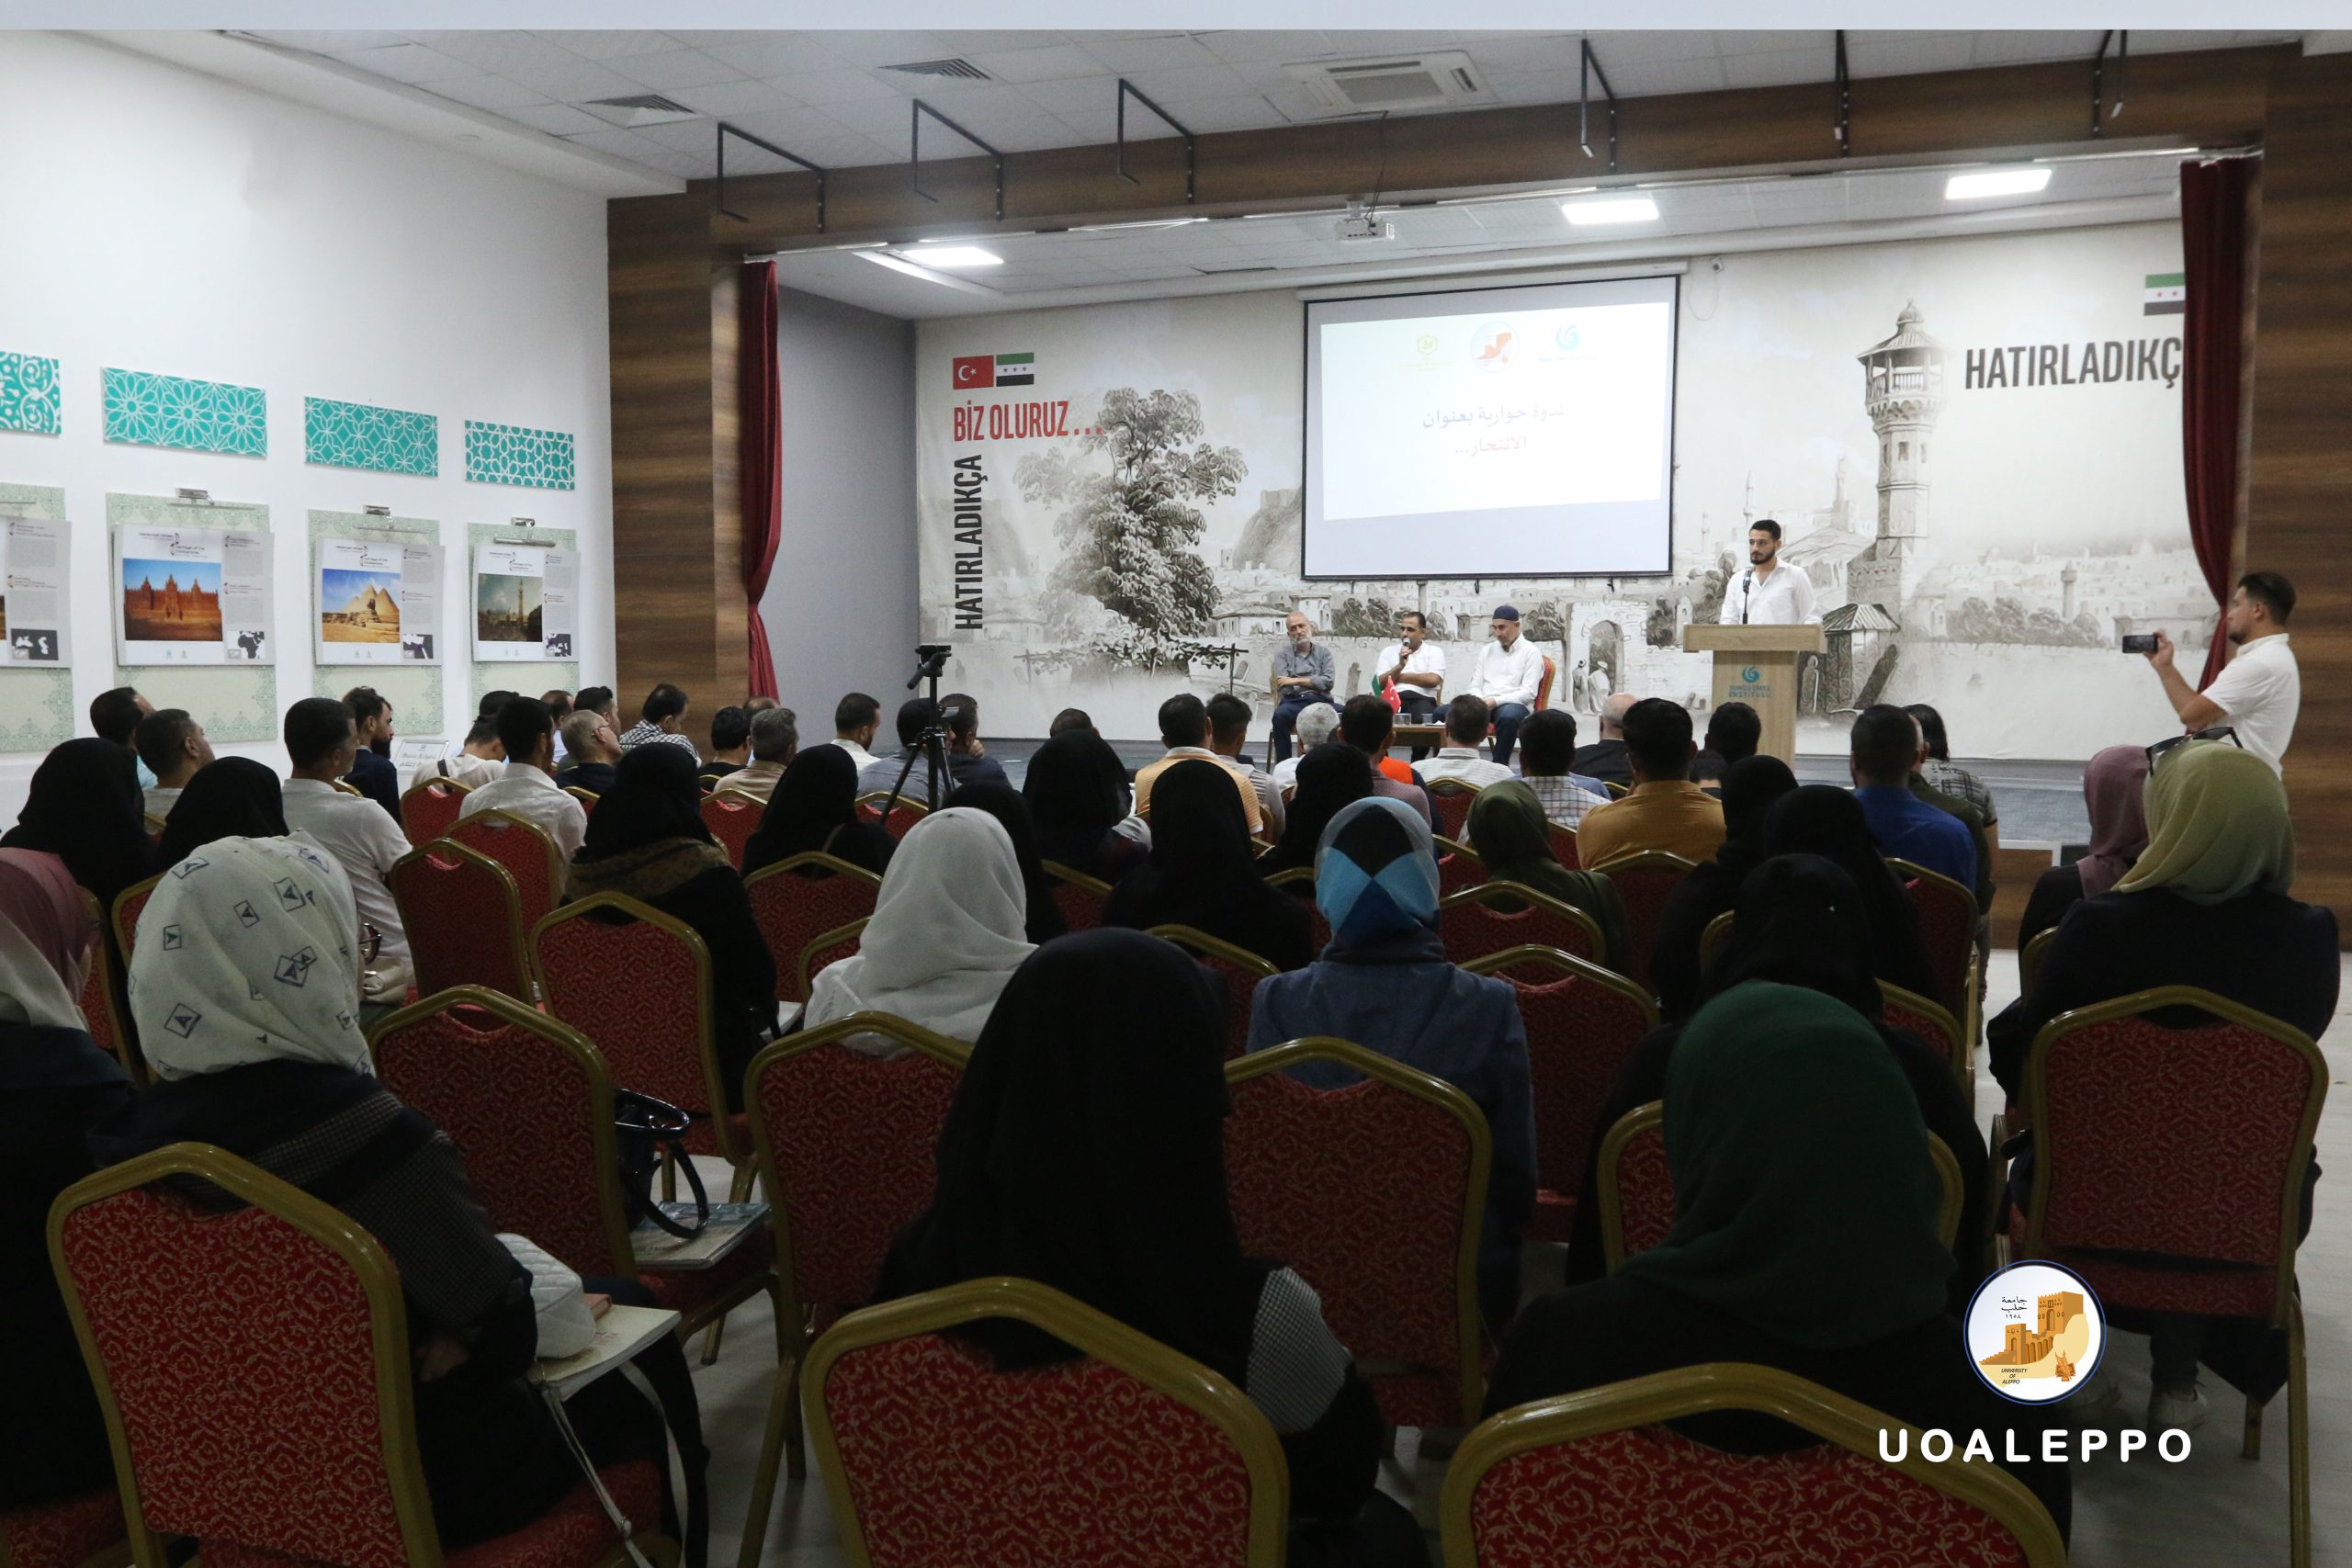 The first constituent conference to study the psychological, educational, and social phenomenon in the north of Syria.